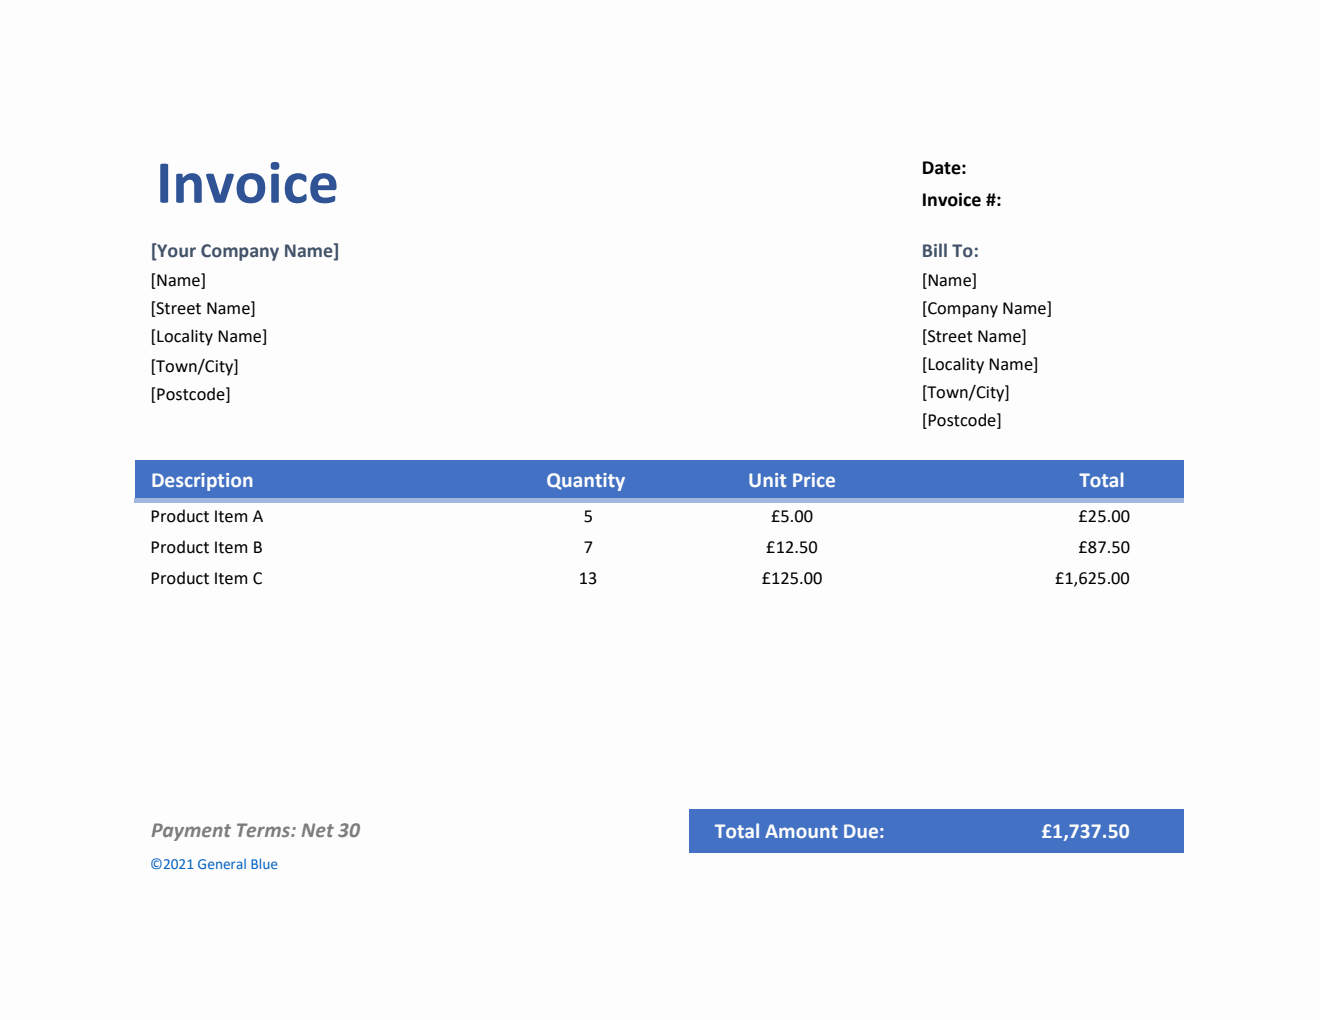 Invoice Template for U.K. in Excel (Colorful)